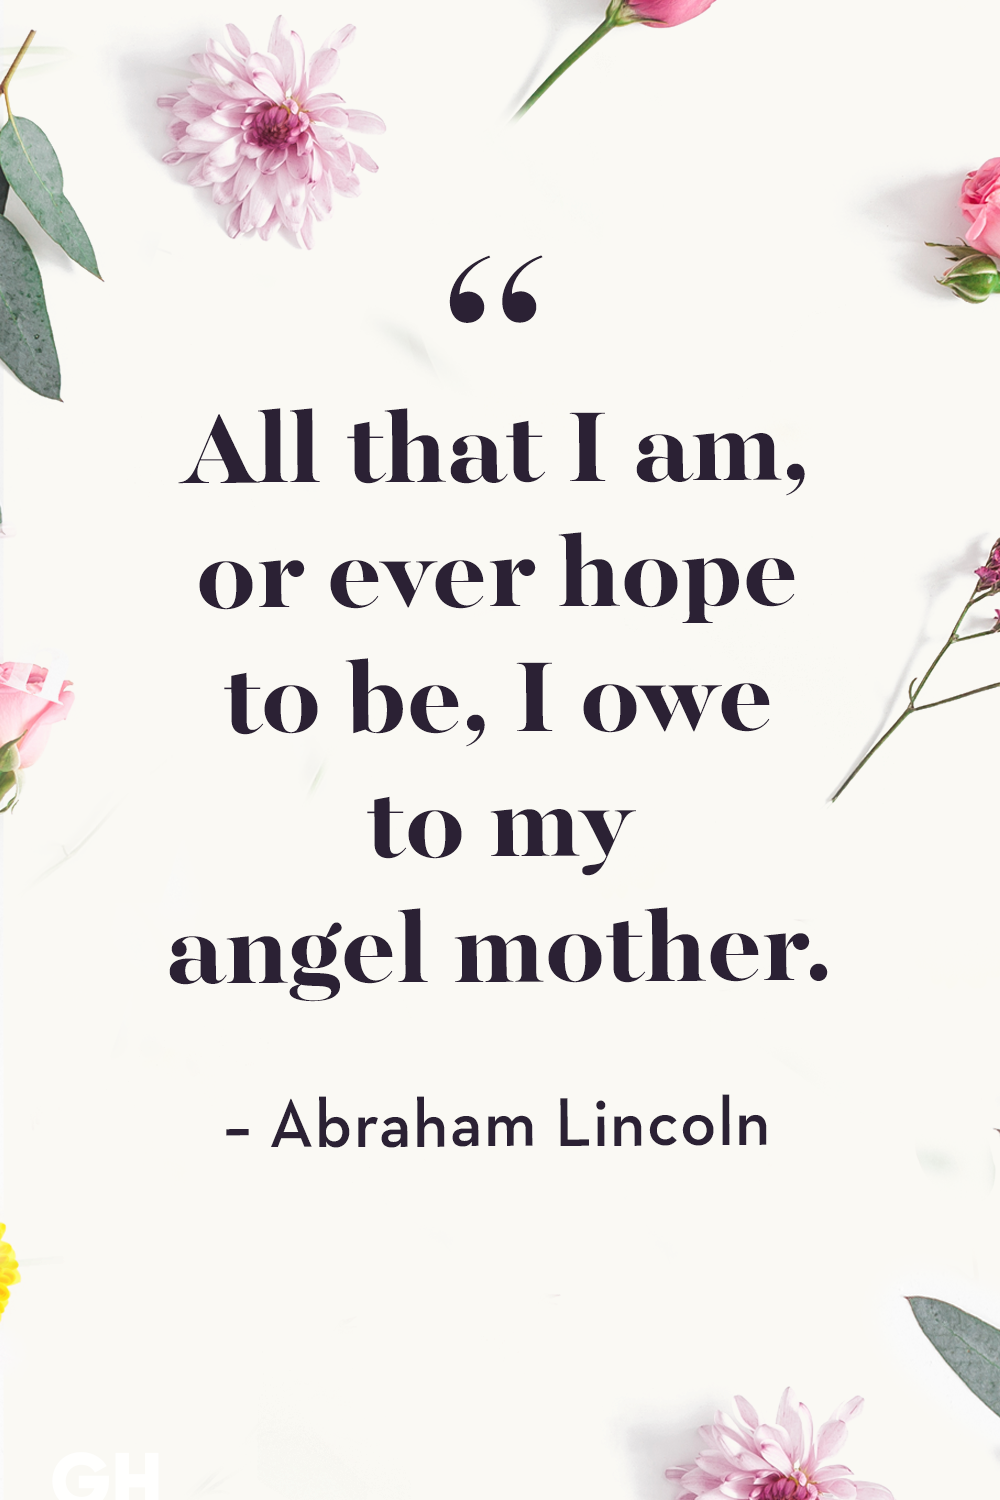 35 Best Mother S Day Quotes Heartfelt Mom Sayings And Poems For Mothers Day